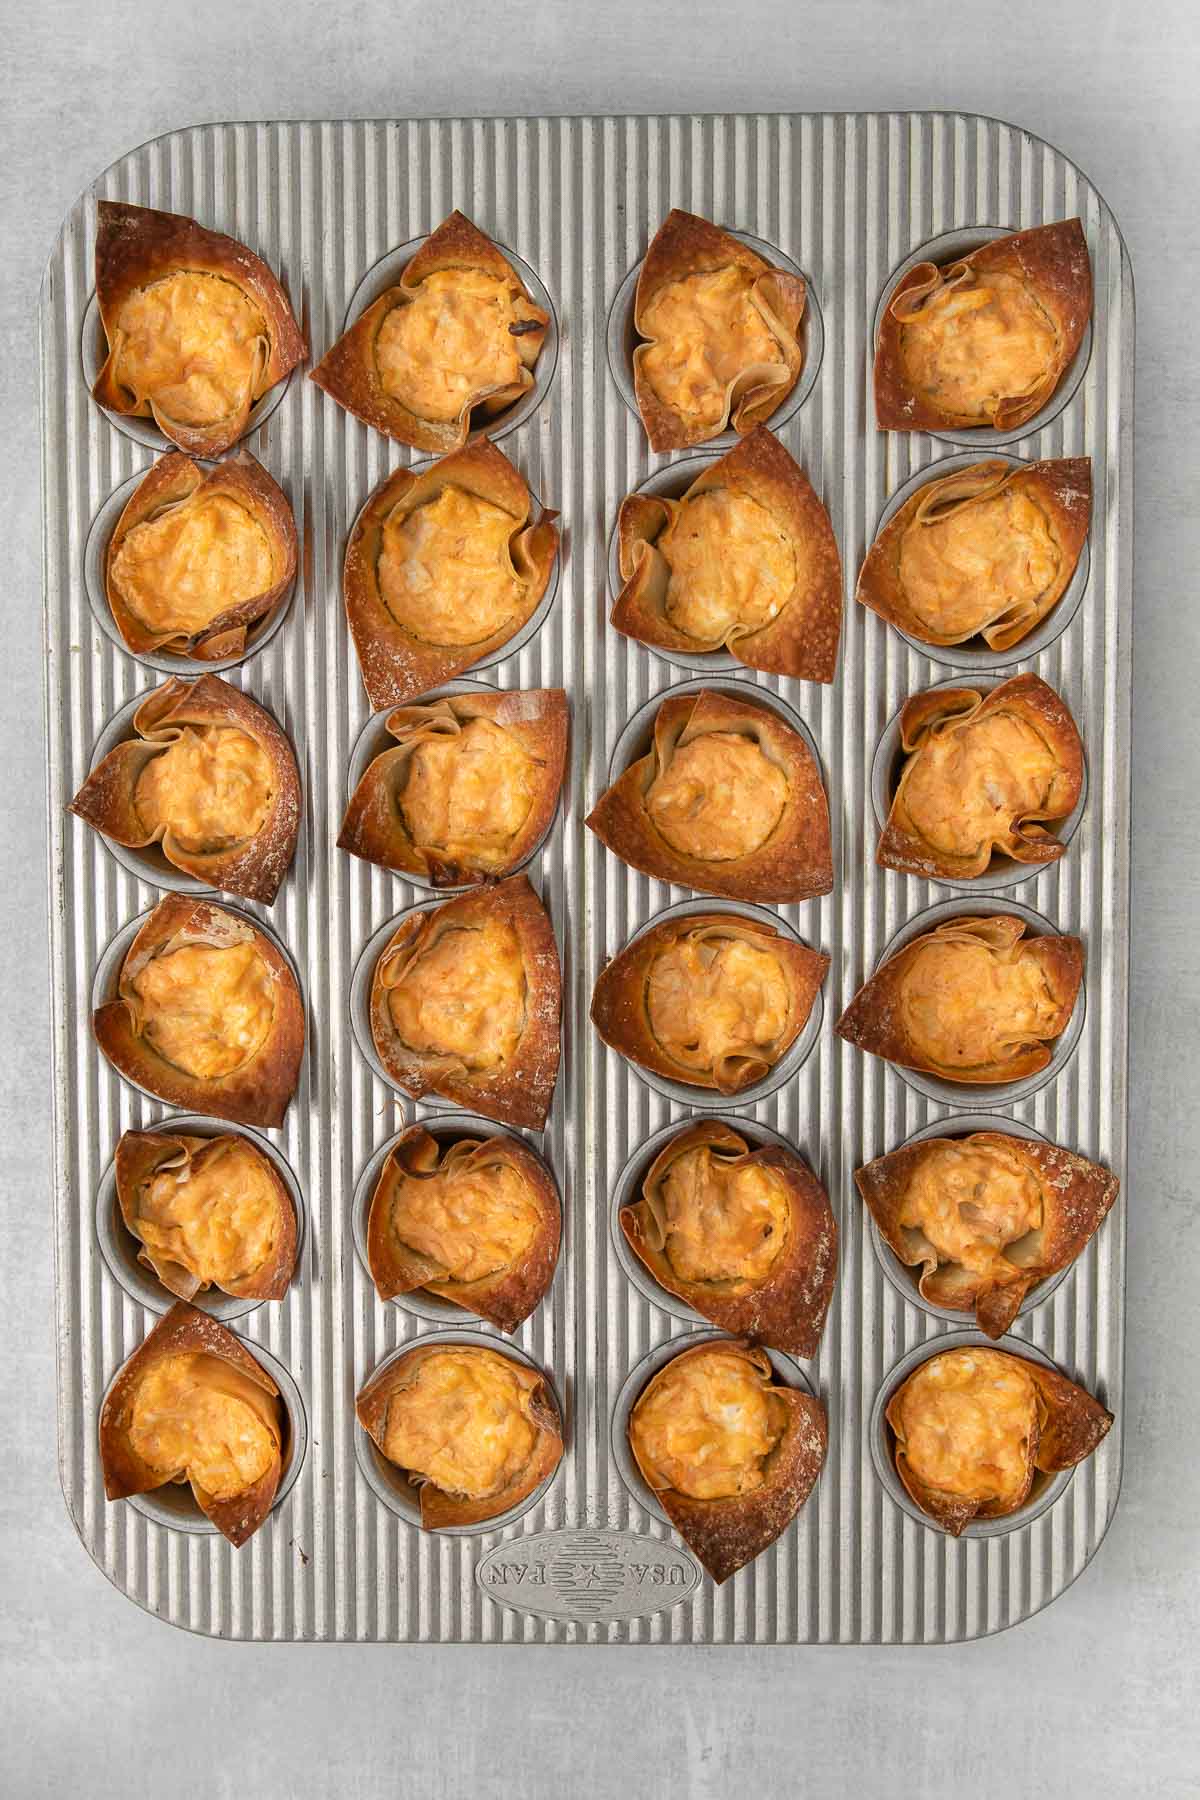 mini muffin tin with 24 wonton wrappers baked with buffalo chicken and cream cheese mixture.